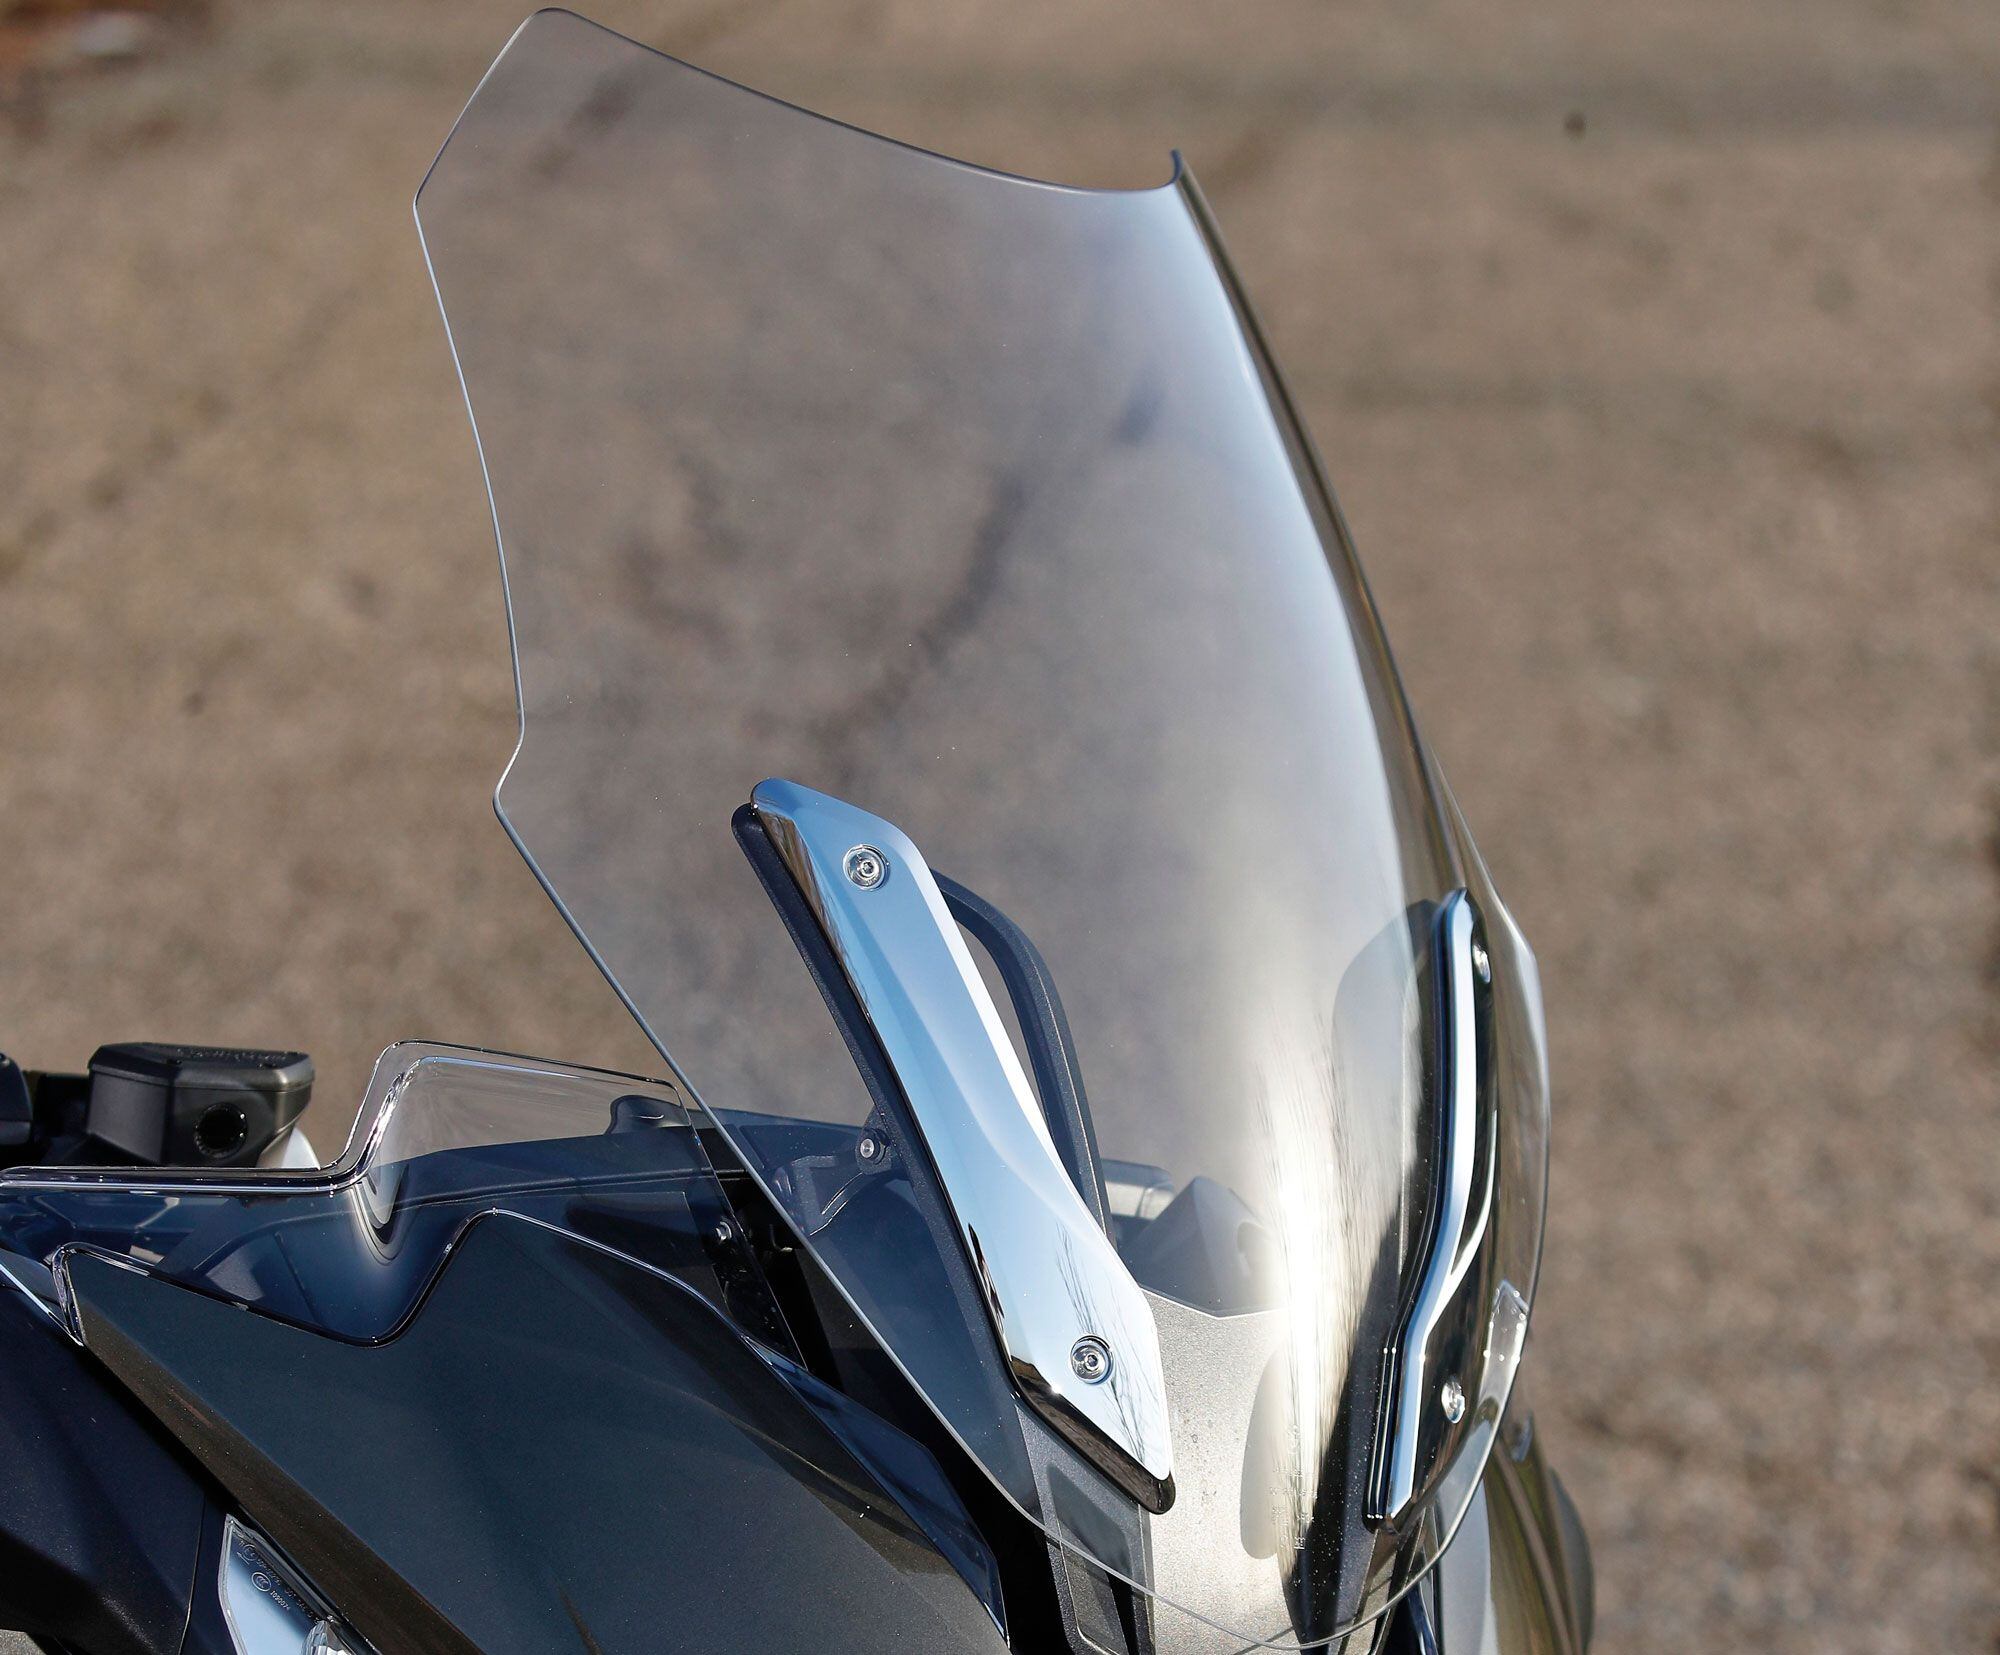 In the raised position, the BMW R 1250 RT’s windshield cleanly diverts wind over the rider’s head and shoulders.